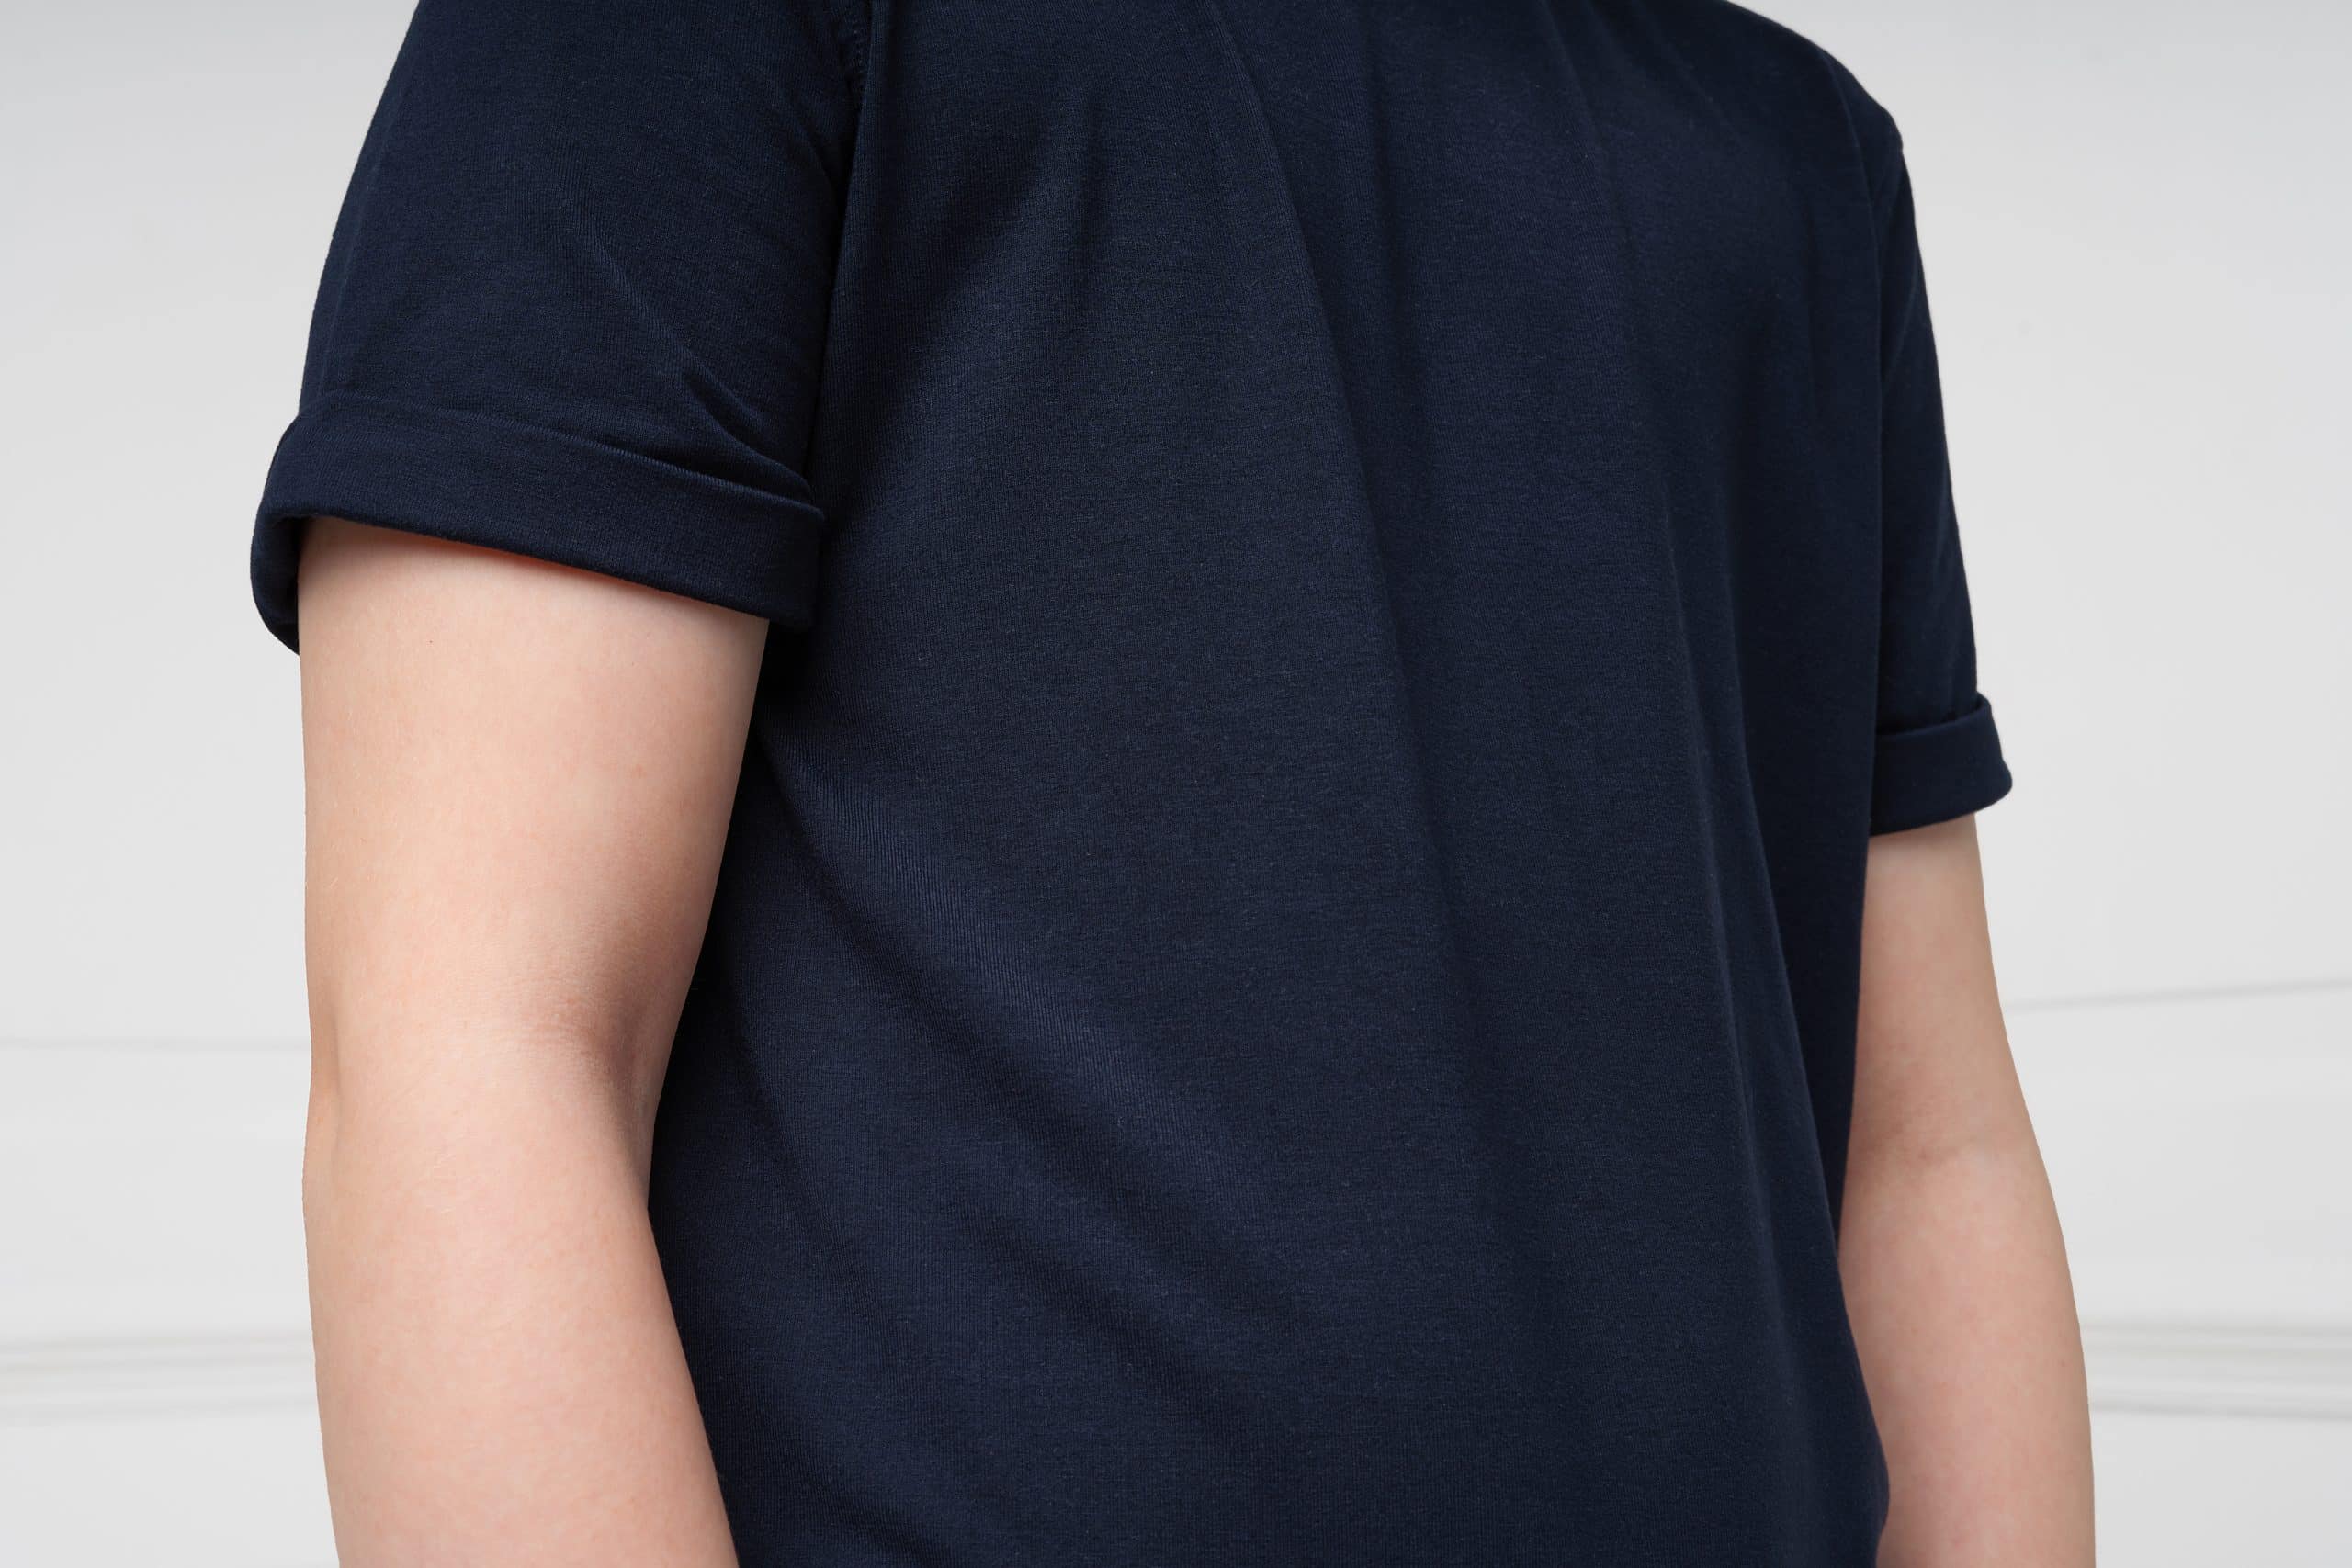 A close up of the sleeves and top of the body of a young autistic boy, wearing a dark blue Fidget-T T-shirt. the sleeves can be seen to have rolled back cuffs on them, to protect the wearer from any seams.